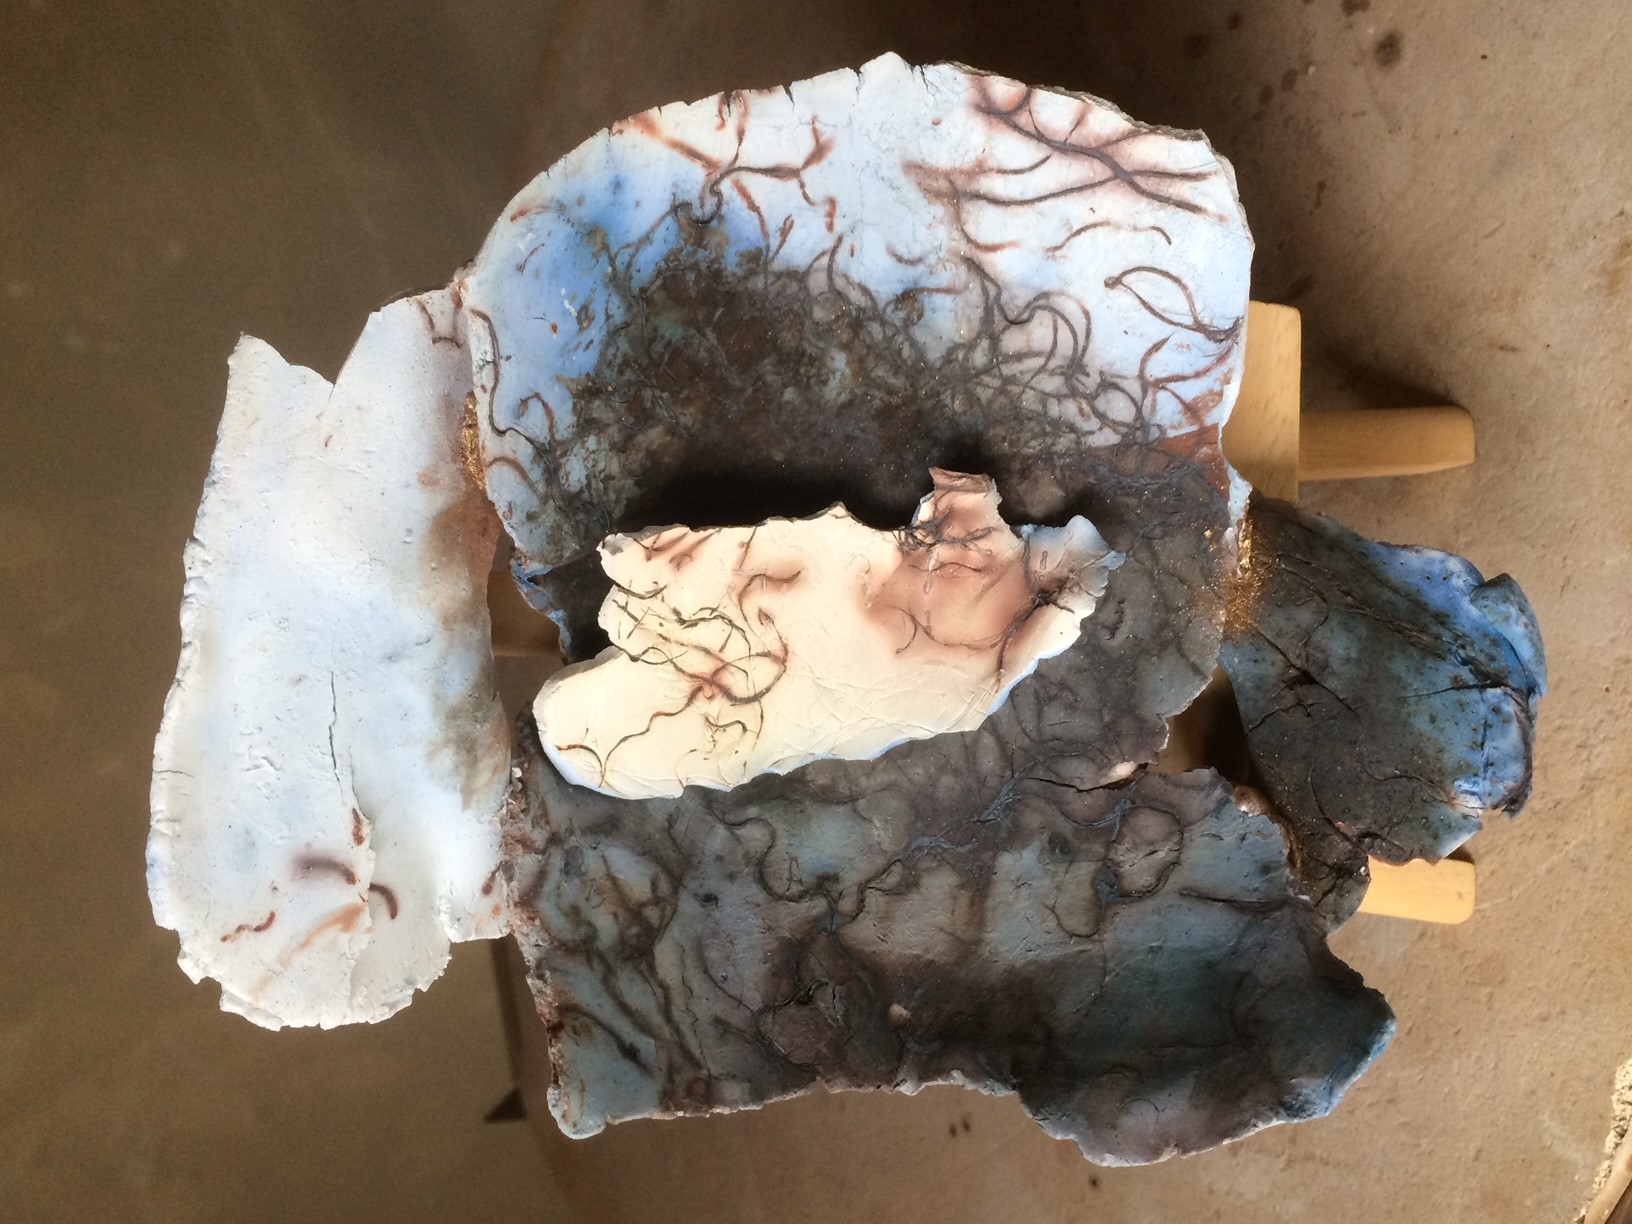 Alison Brannen: Wall Shard Sculpture titled “Blue Lagoon Tidal Pool” (Each sold separately) Product Image 3 of 3